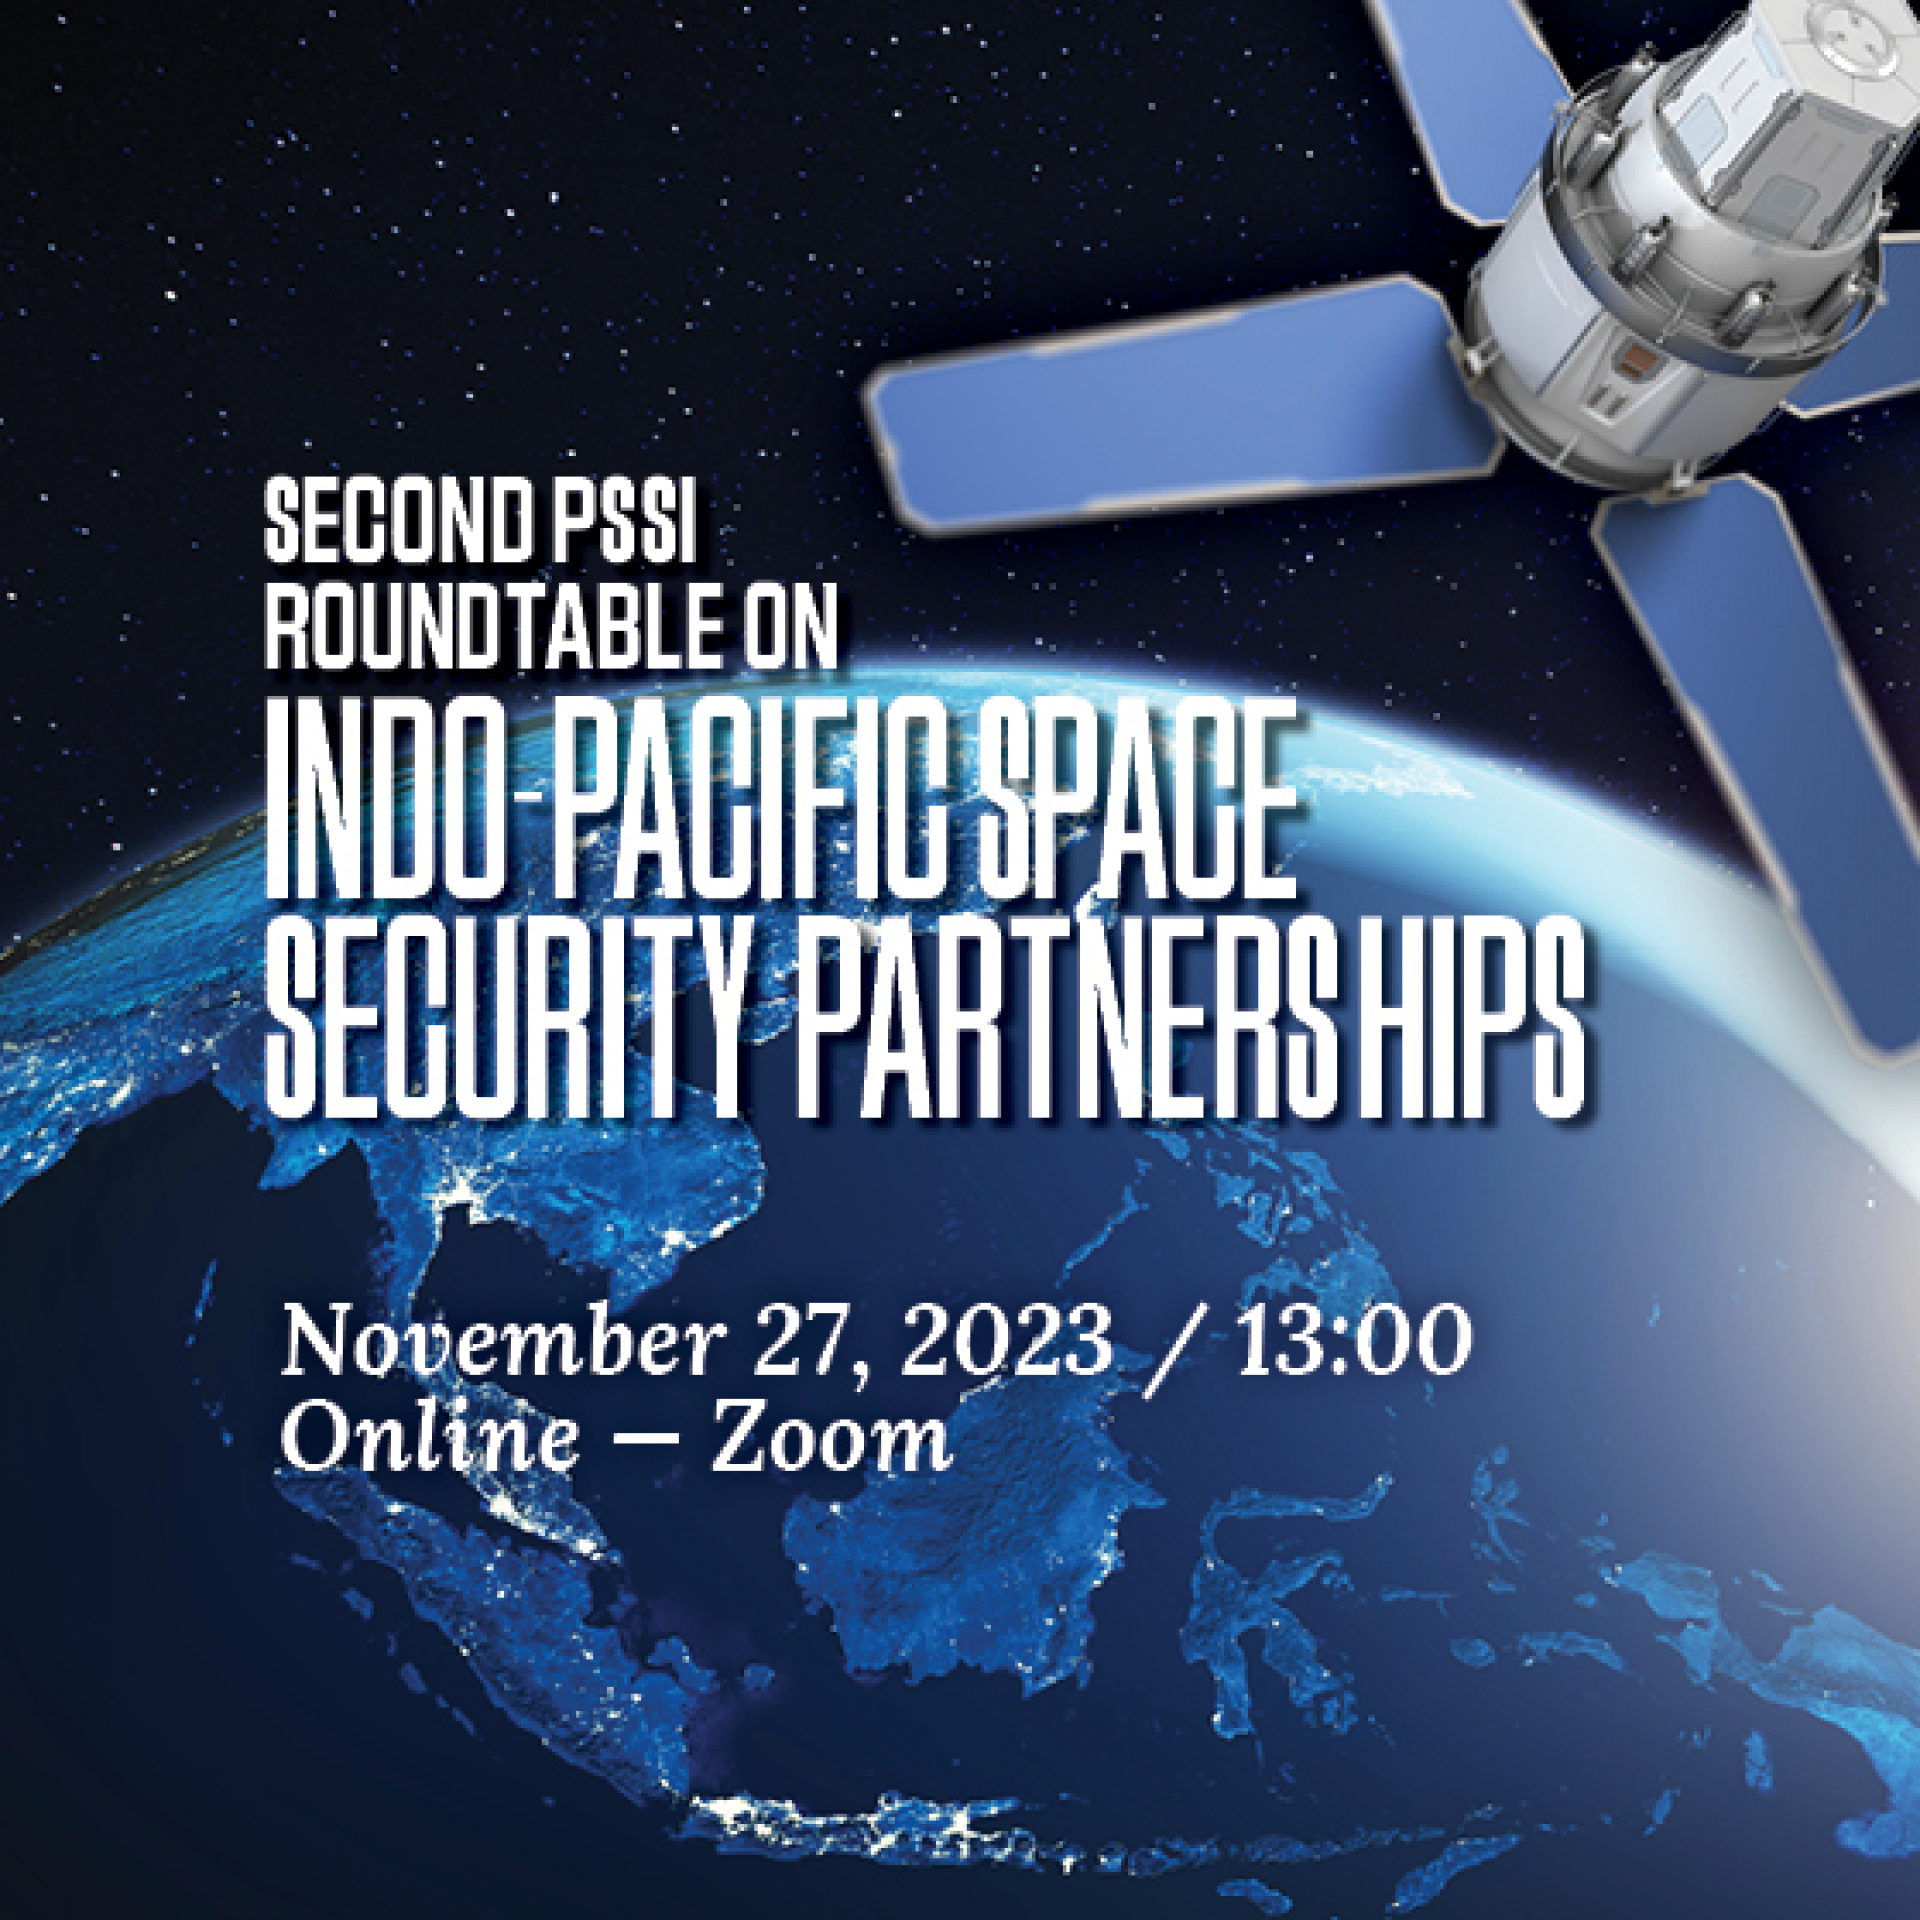 Second_PSSI_Roundtable_on_Indo-Pacific_Space_Security_Partnerships_560x560pxa